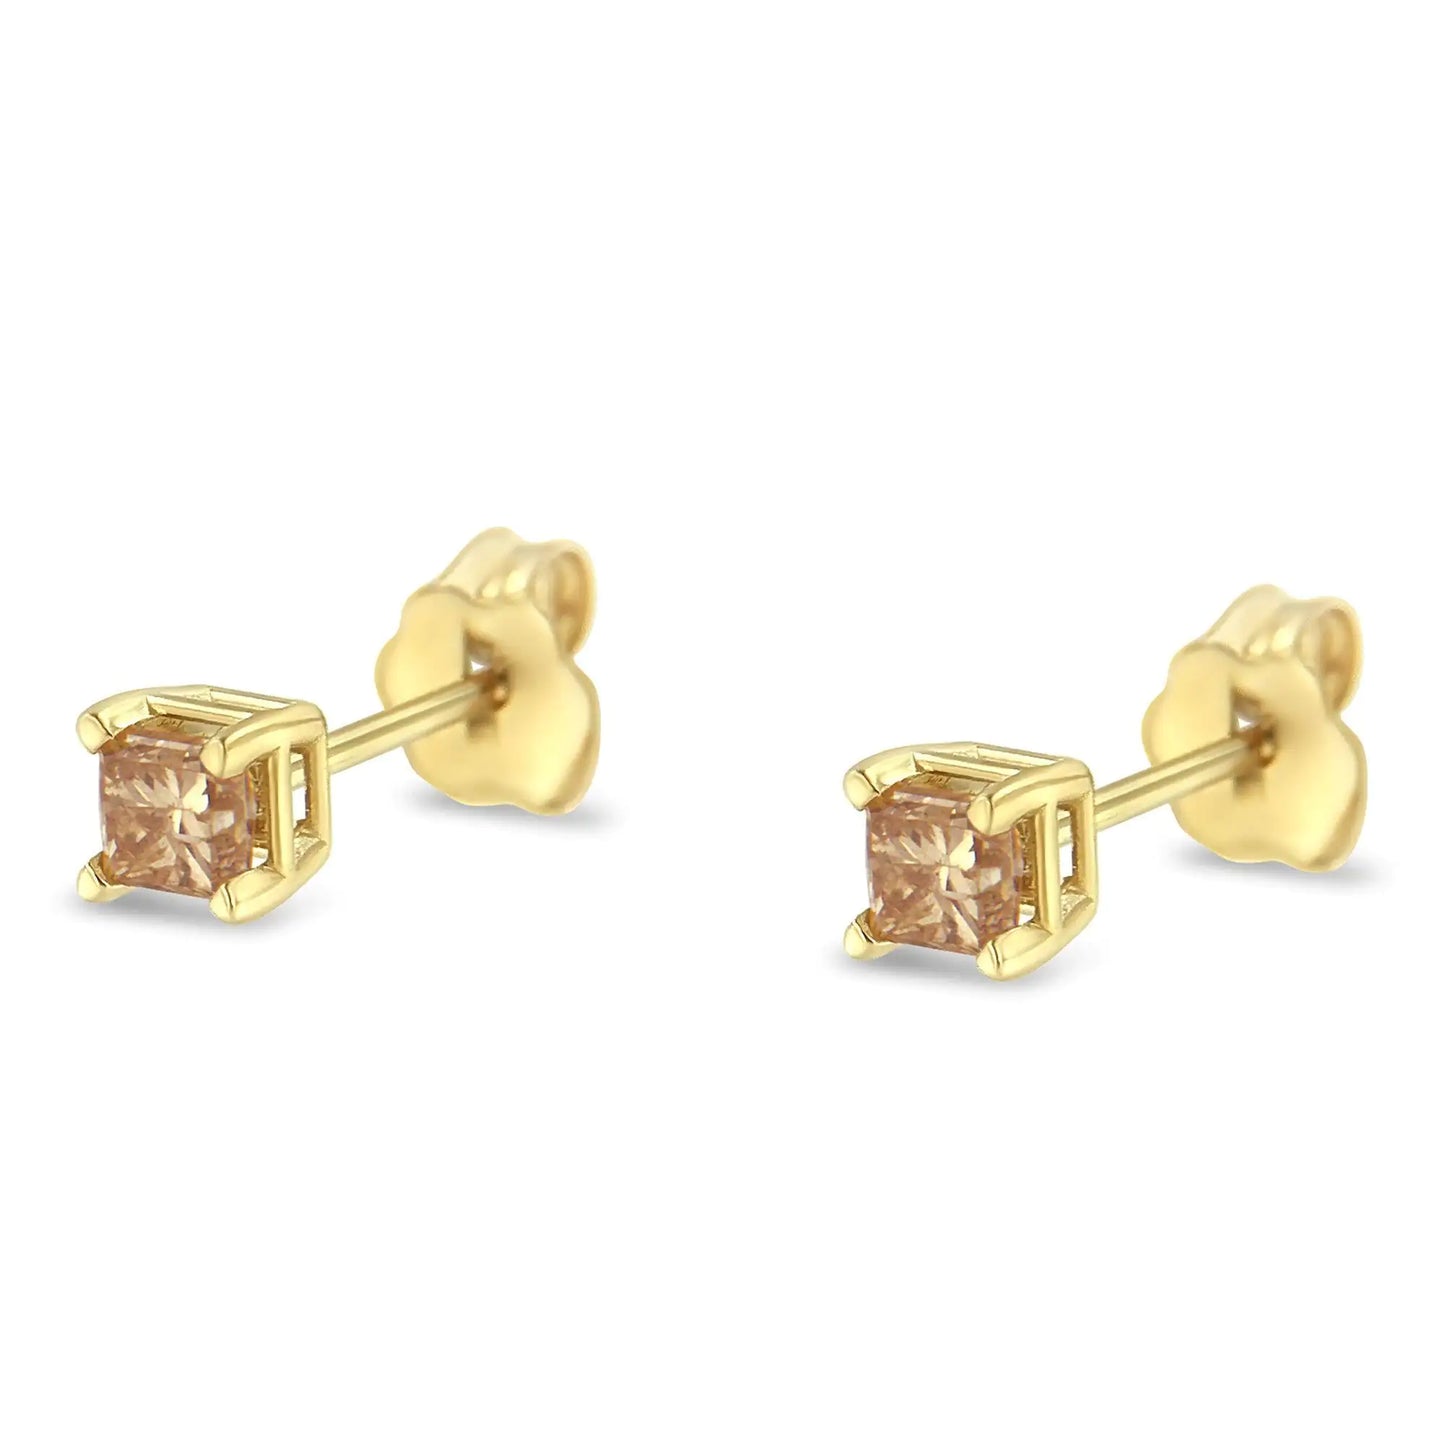 AGS Certified 14K Gold 4-Prong Set Princess-Cut Solitaire Diamond Push Back Stud Earrings (J-K Color, I1-I2 Clarity)